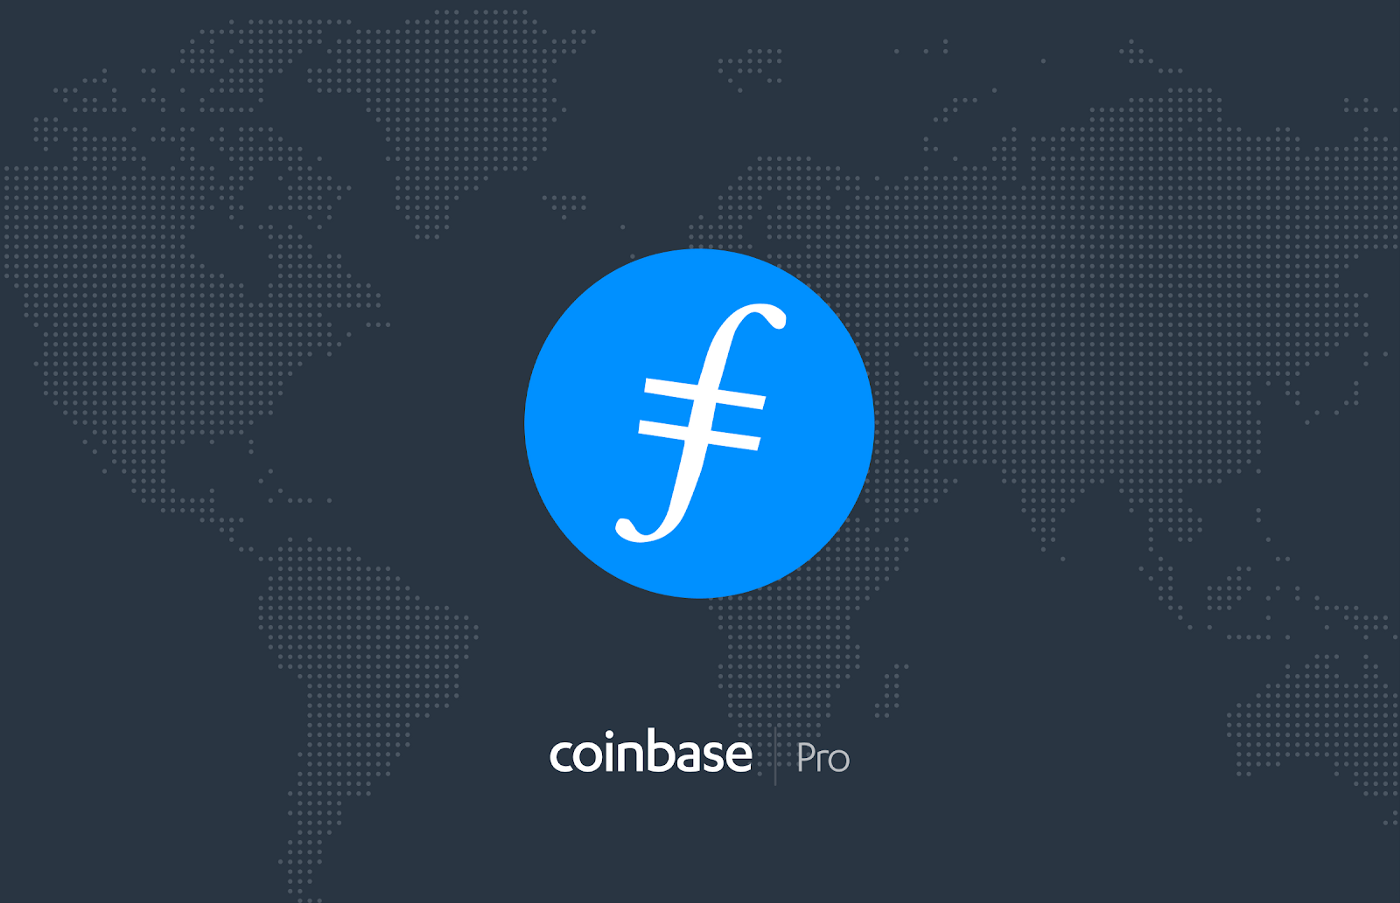 Filecoin (FIL) is launching on Coinbase Pro